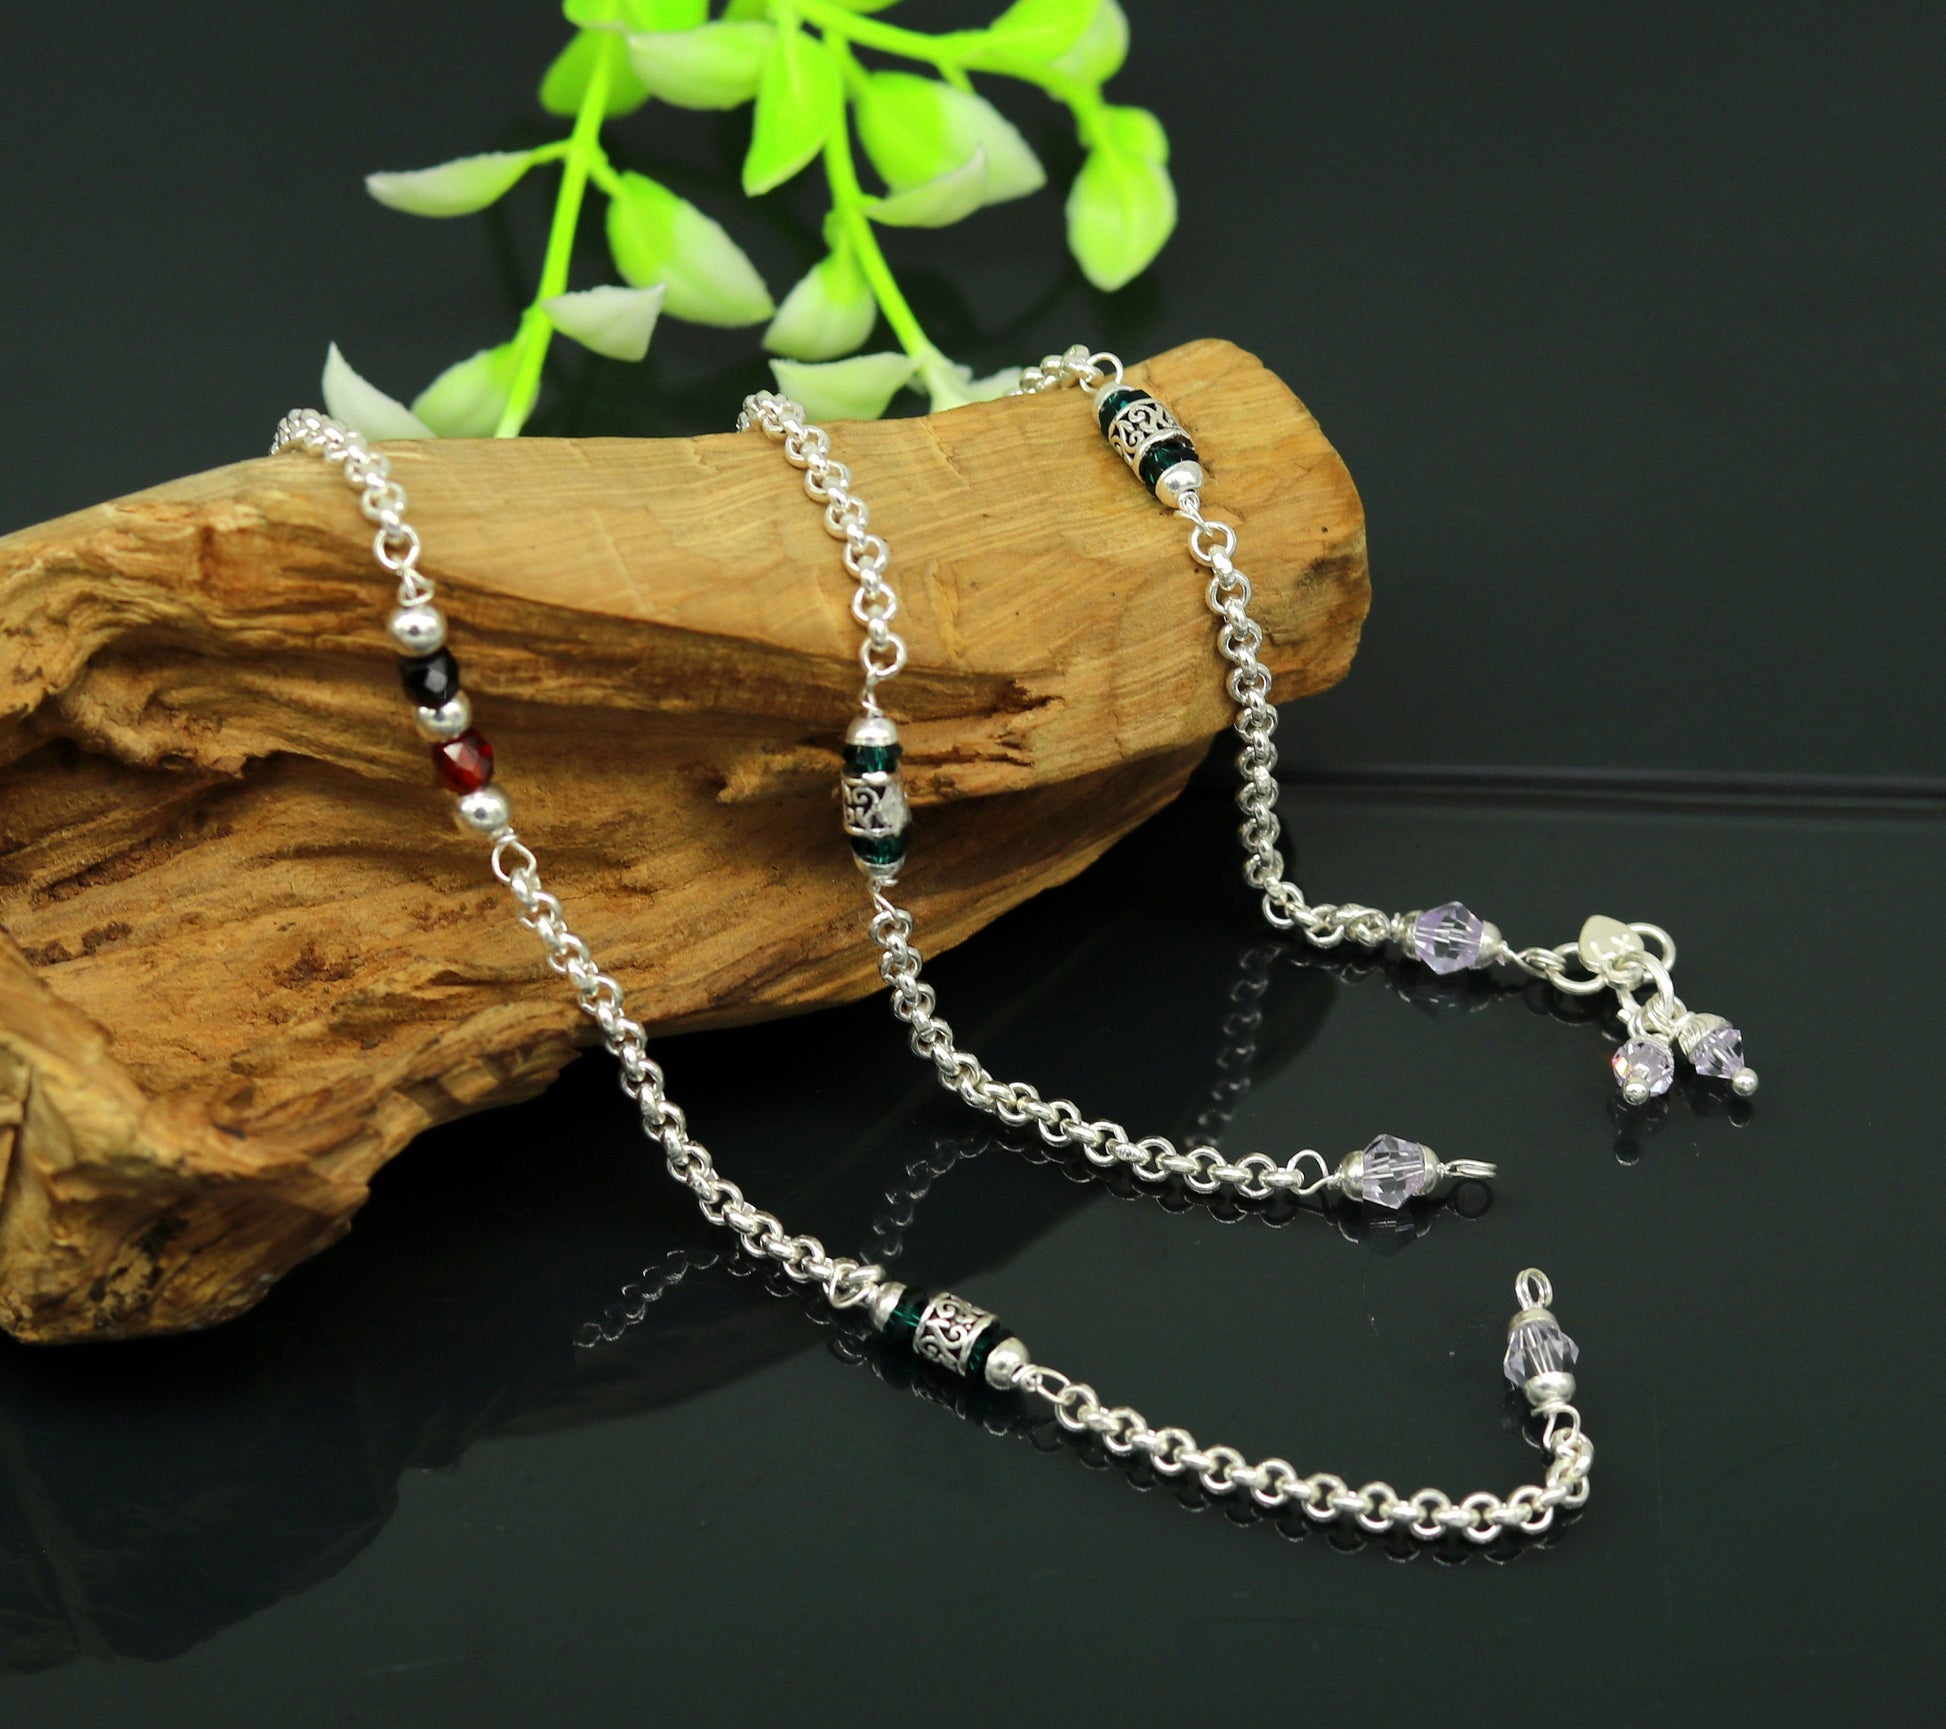 925 sterling silver handmade customized 10" long rolo chain ankle bracelet, anklets, excellent beaded anklet tribal belly dance nank228 - TRIBAL ORNAMENTS